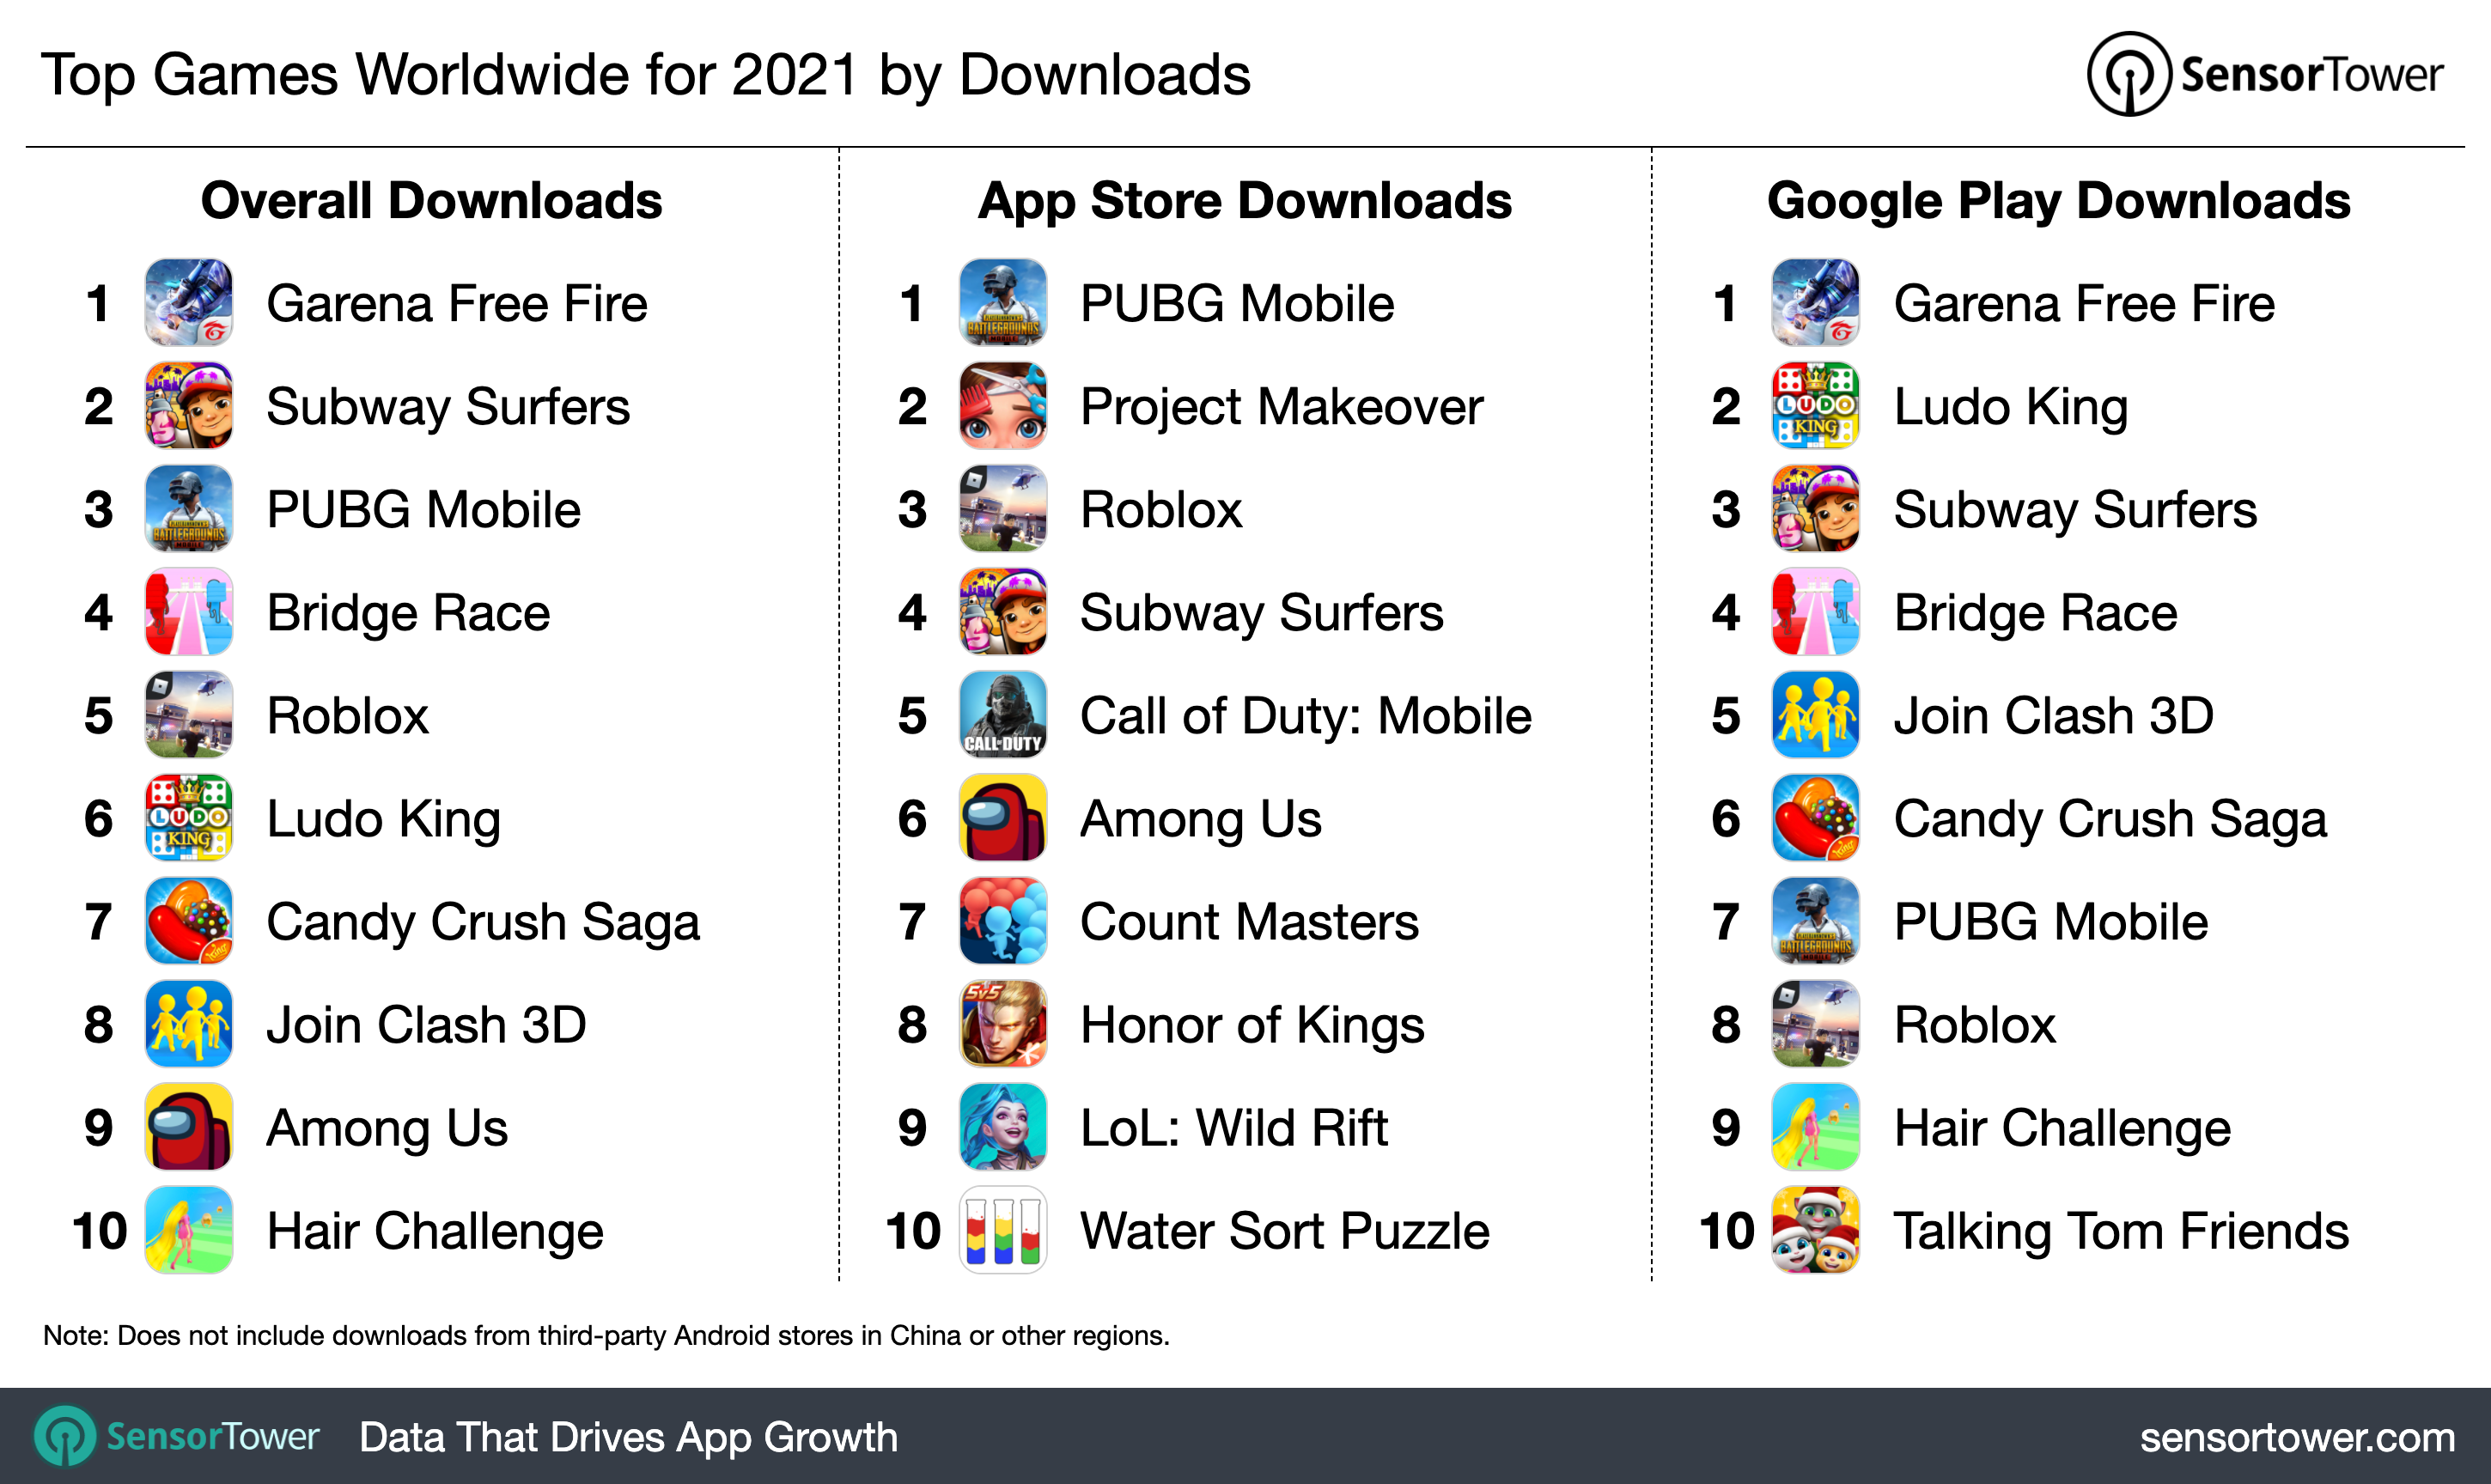 2021's top mobile games by downloads.